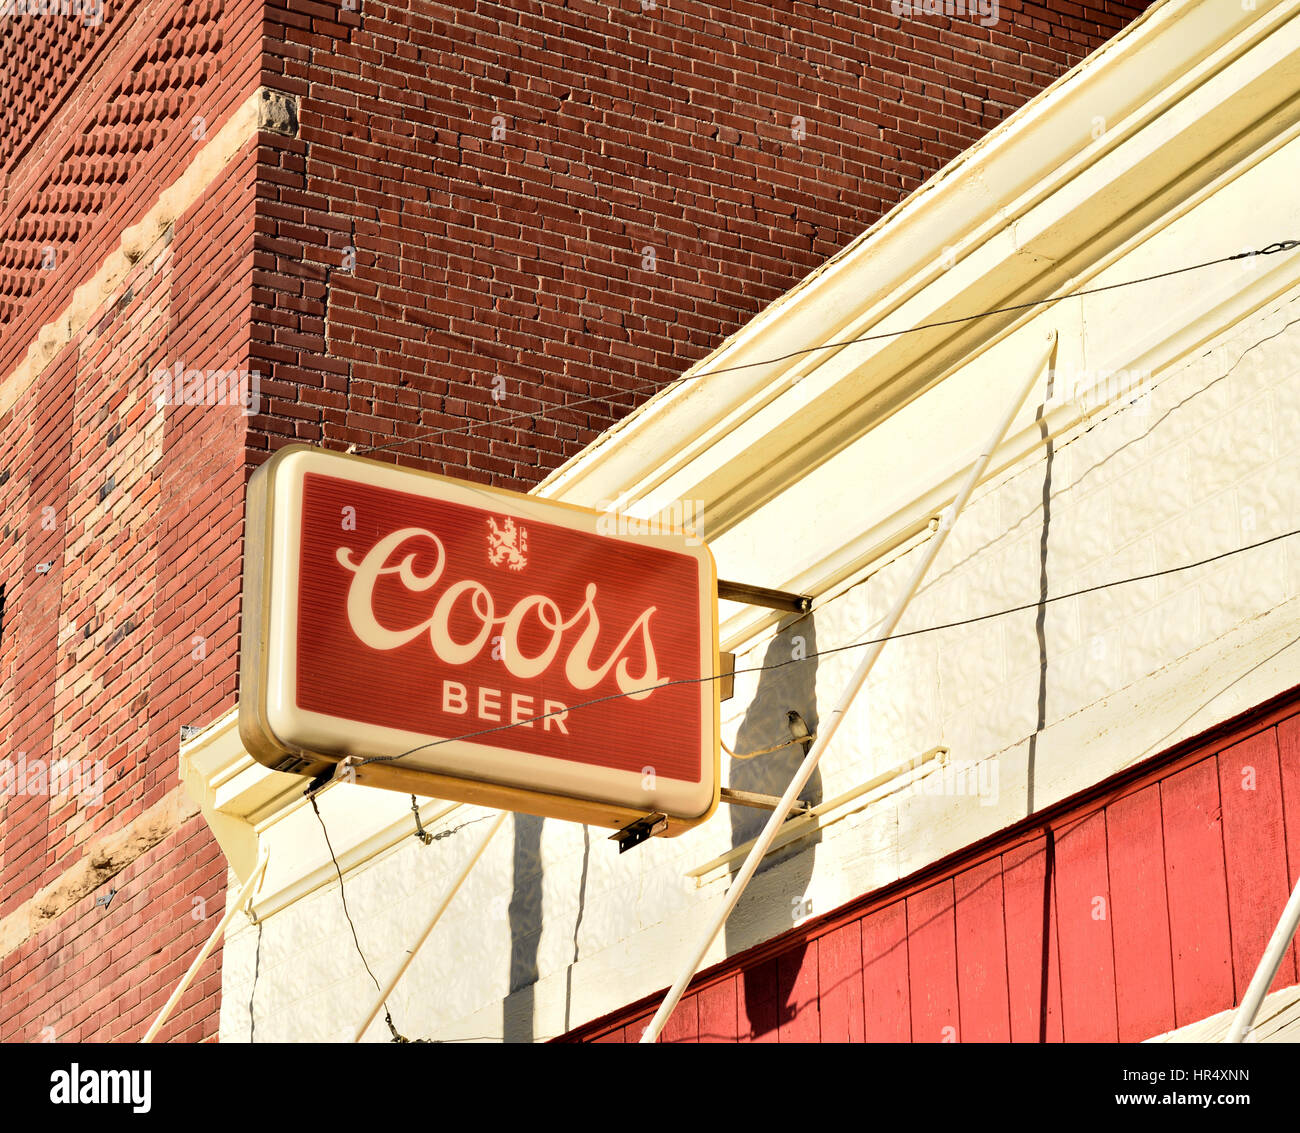 Coors Beer sign atop a bar in a small town Stock Photo